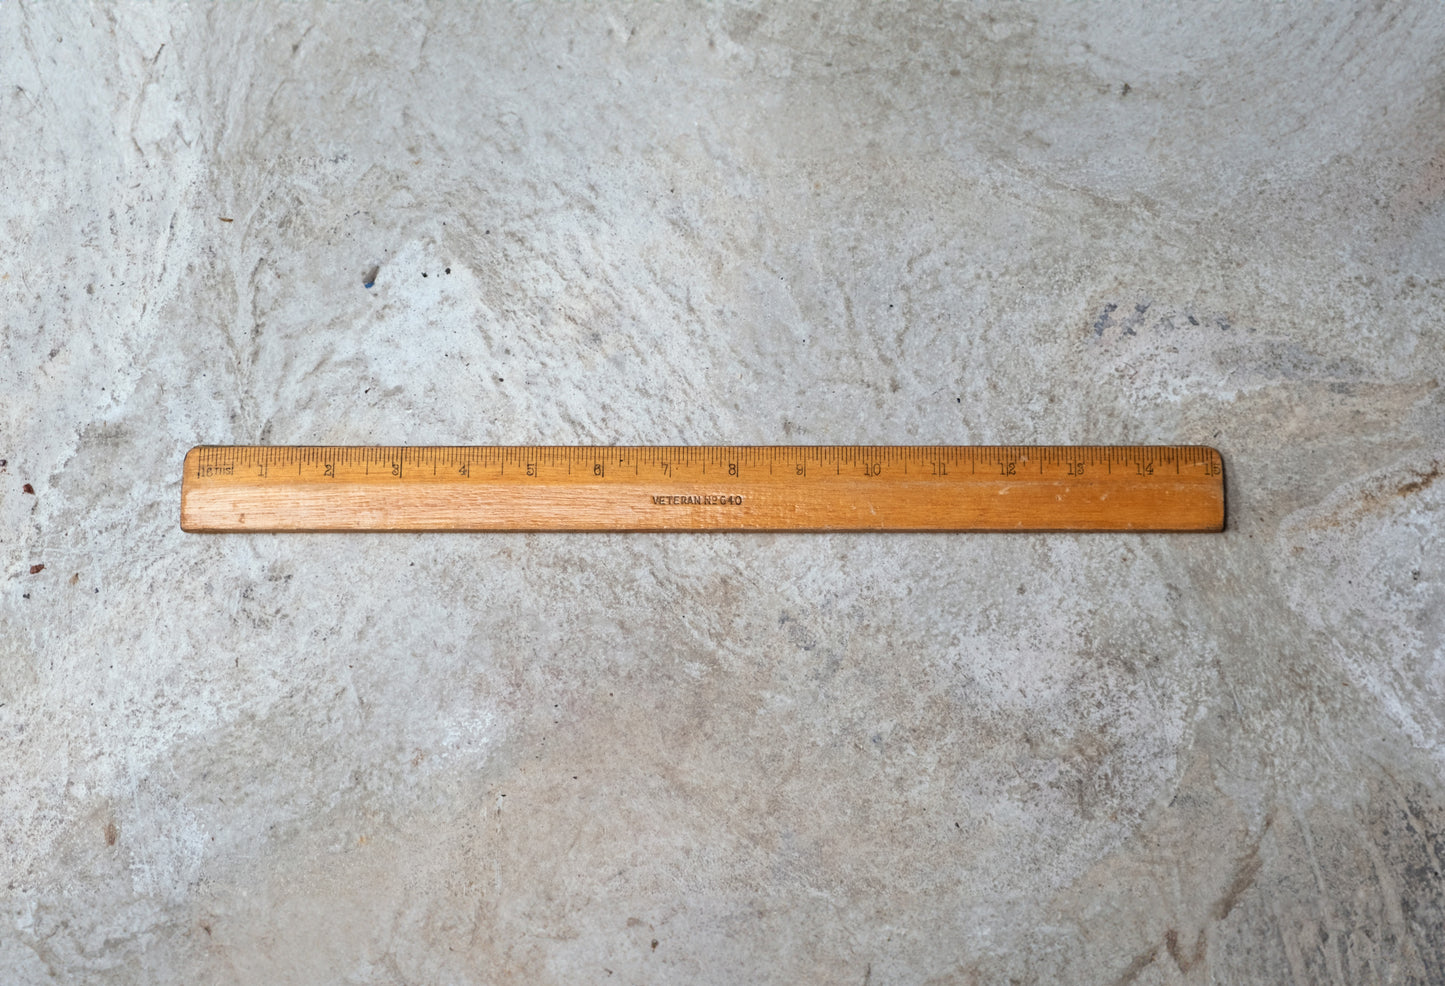 Long Wooden Rulers in Inches